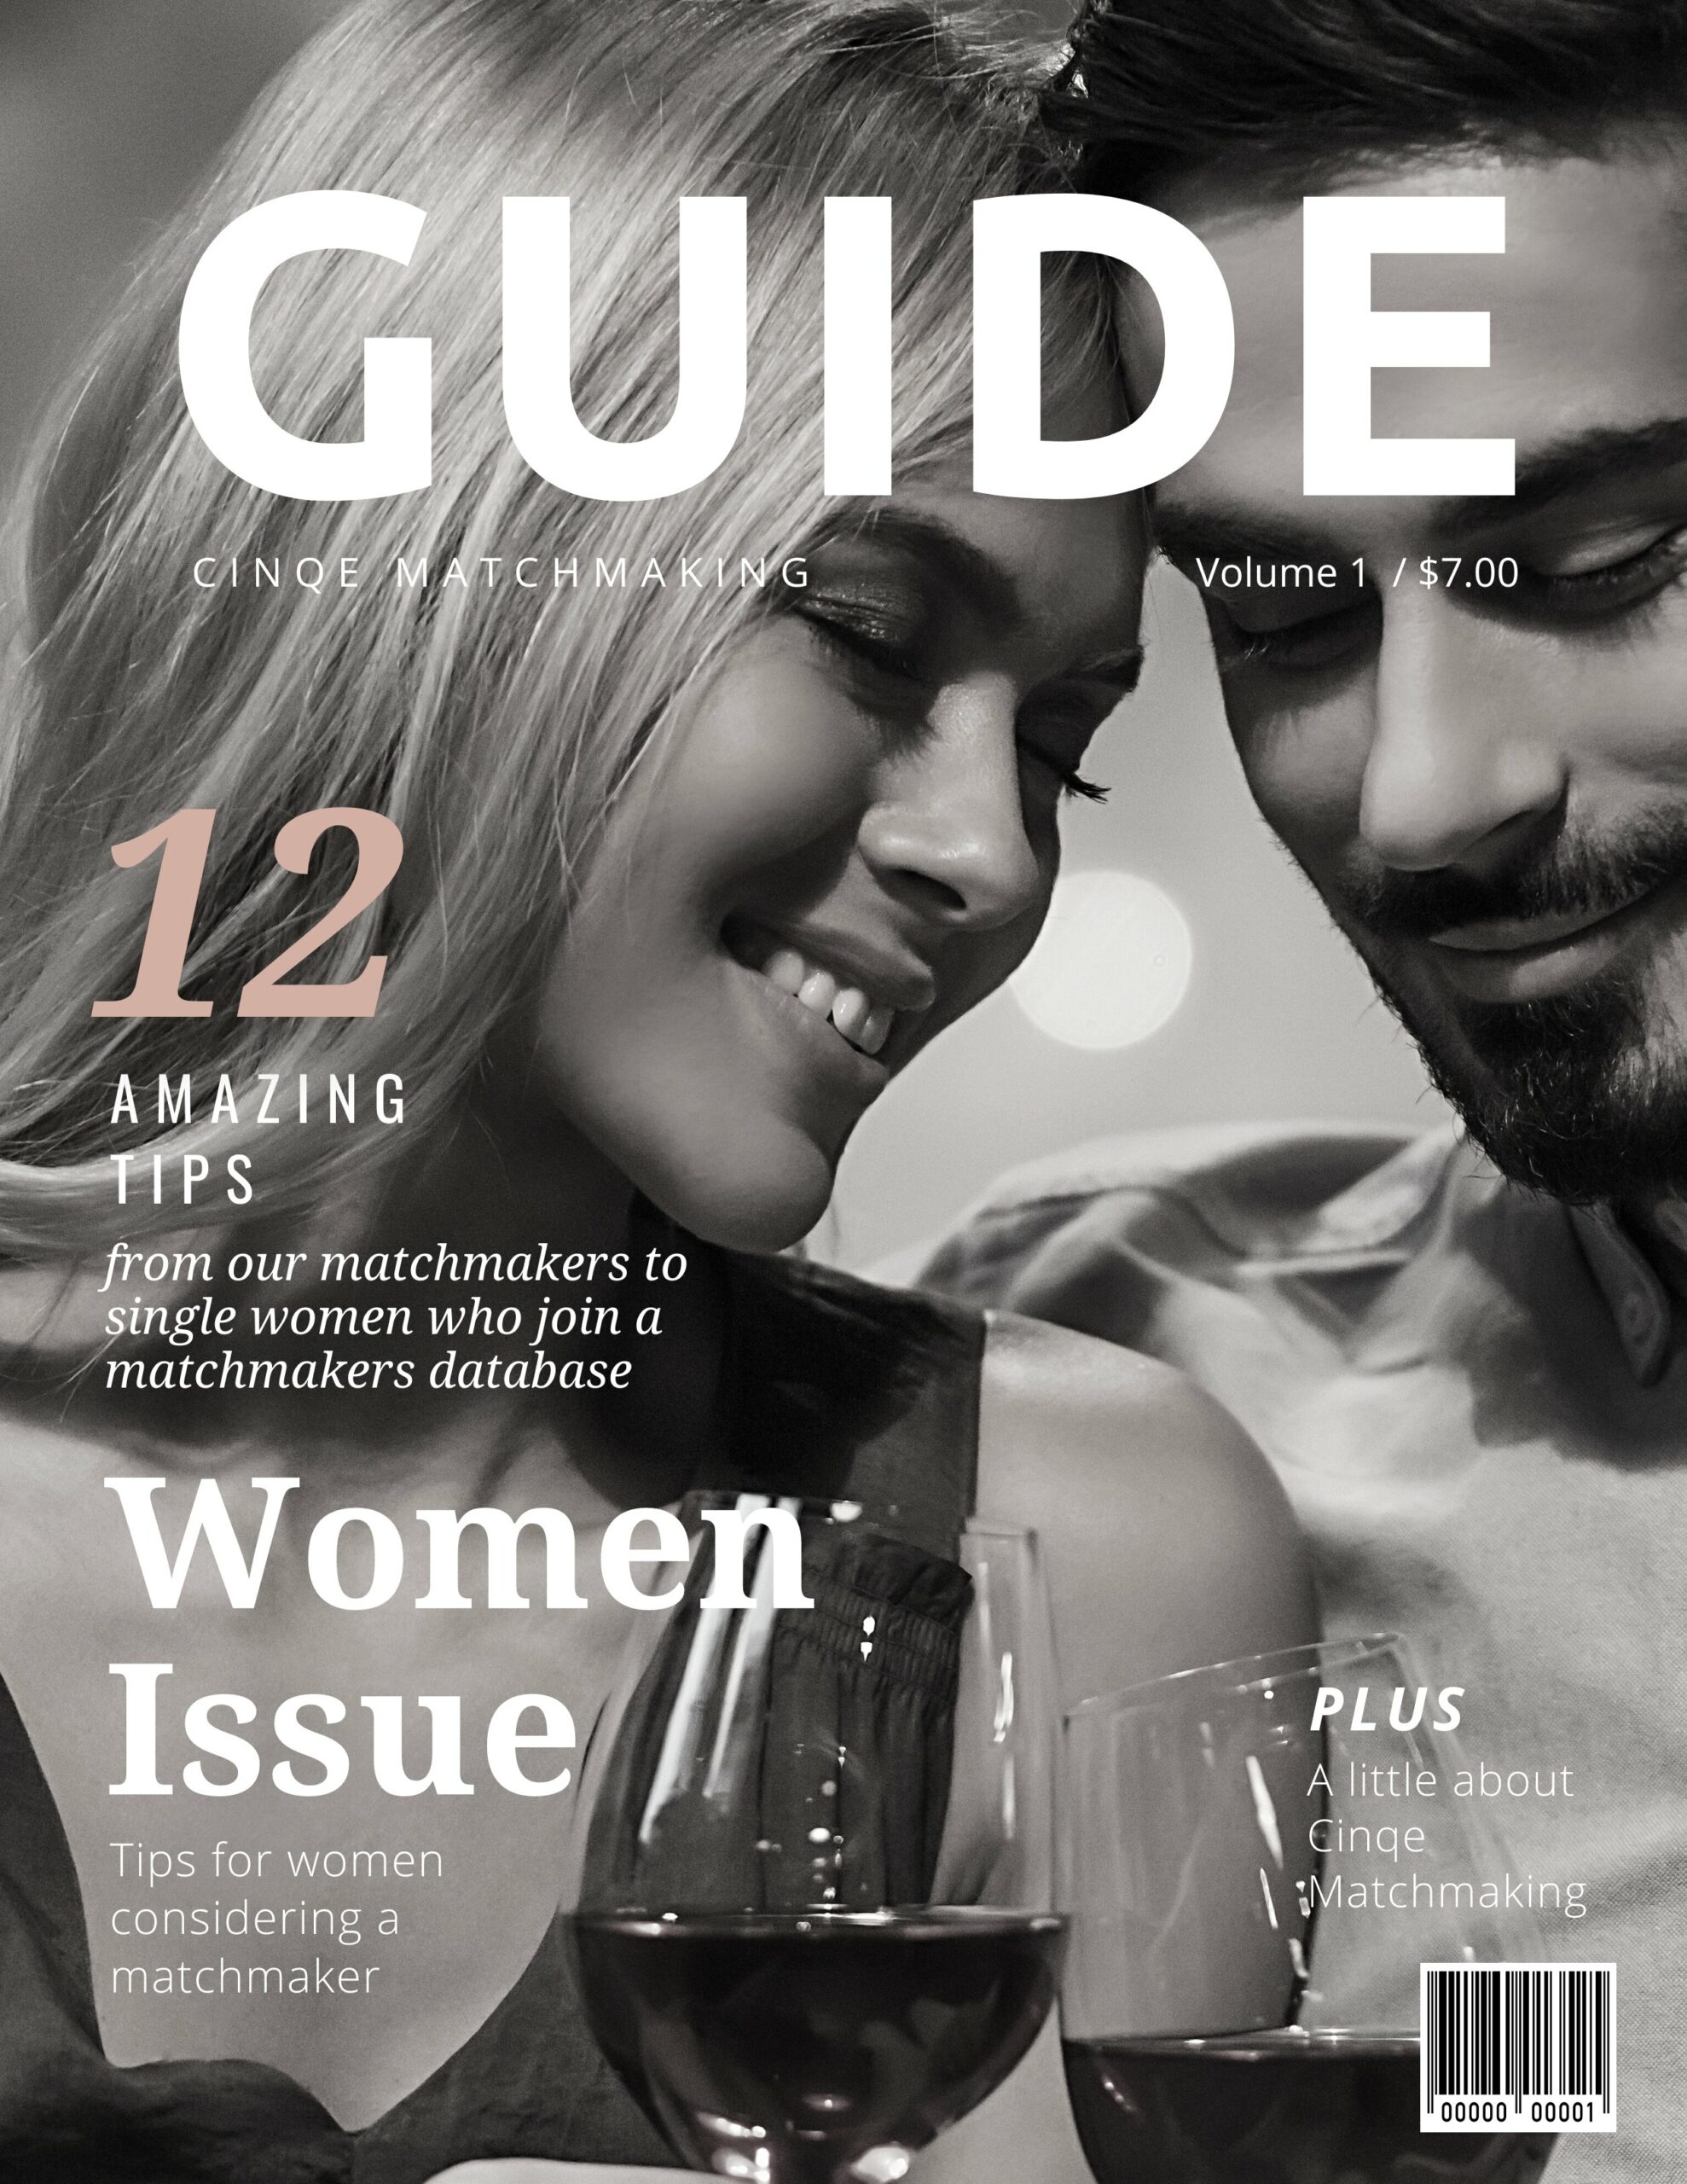 Advice for Women Issue: Volume 1